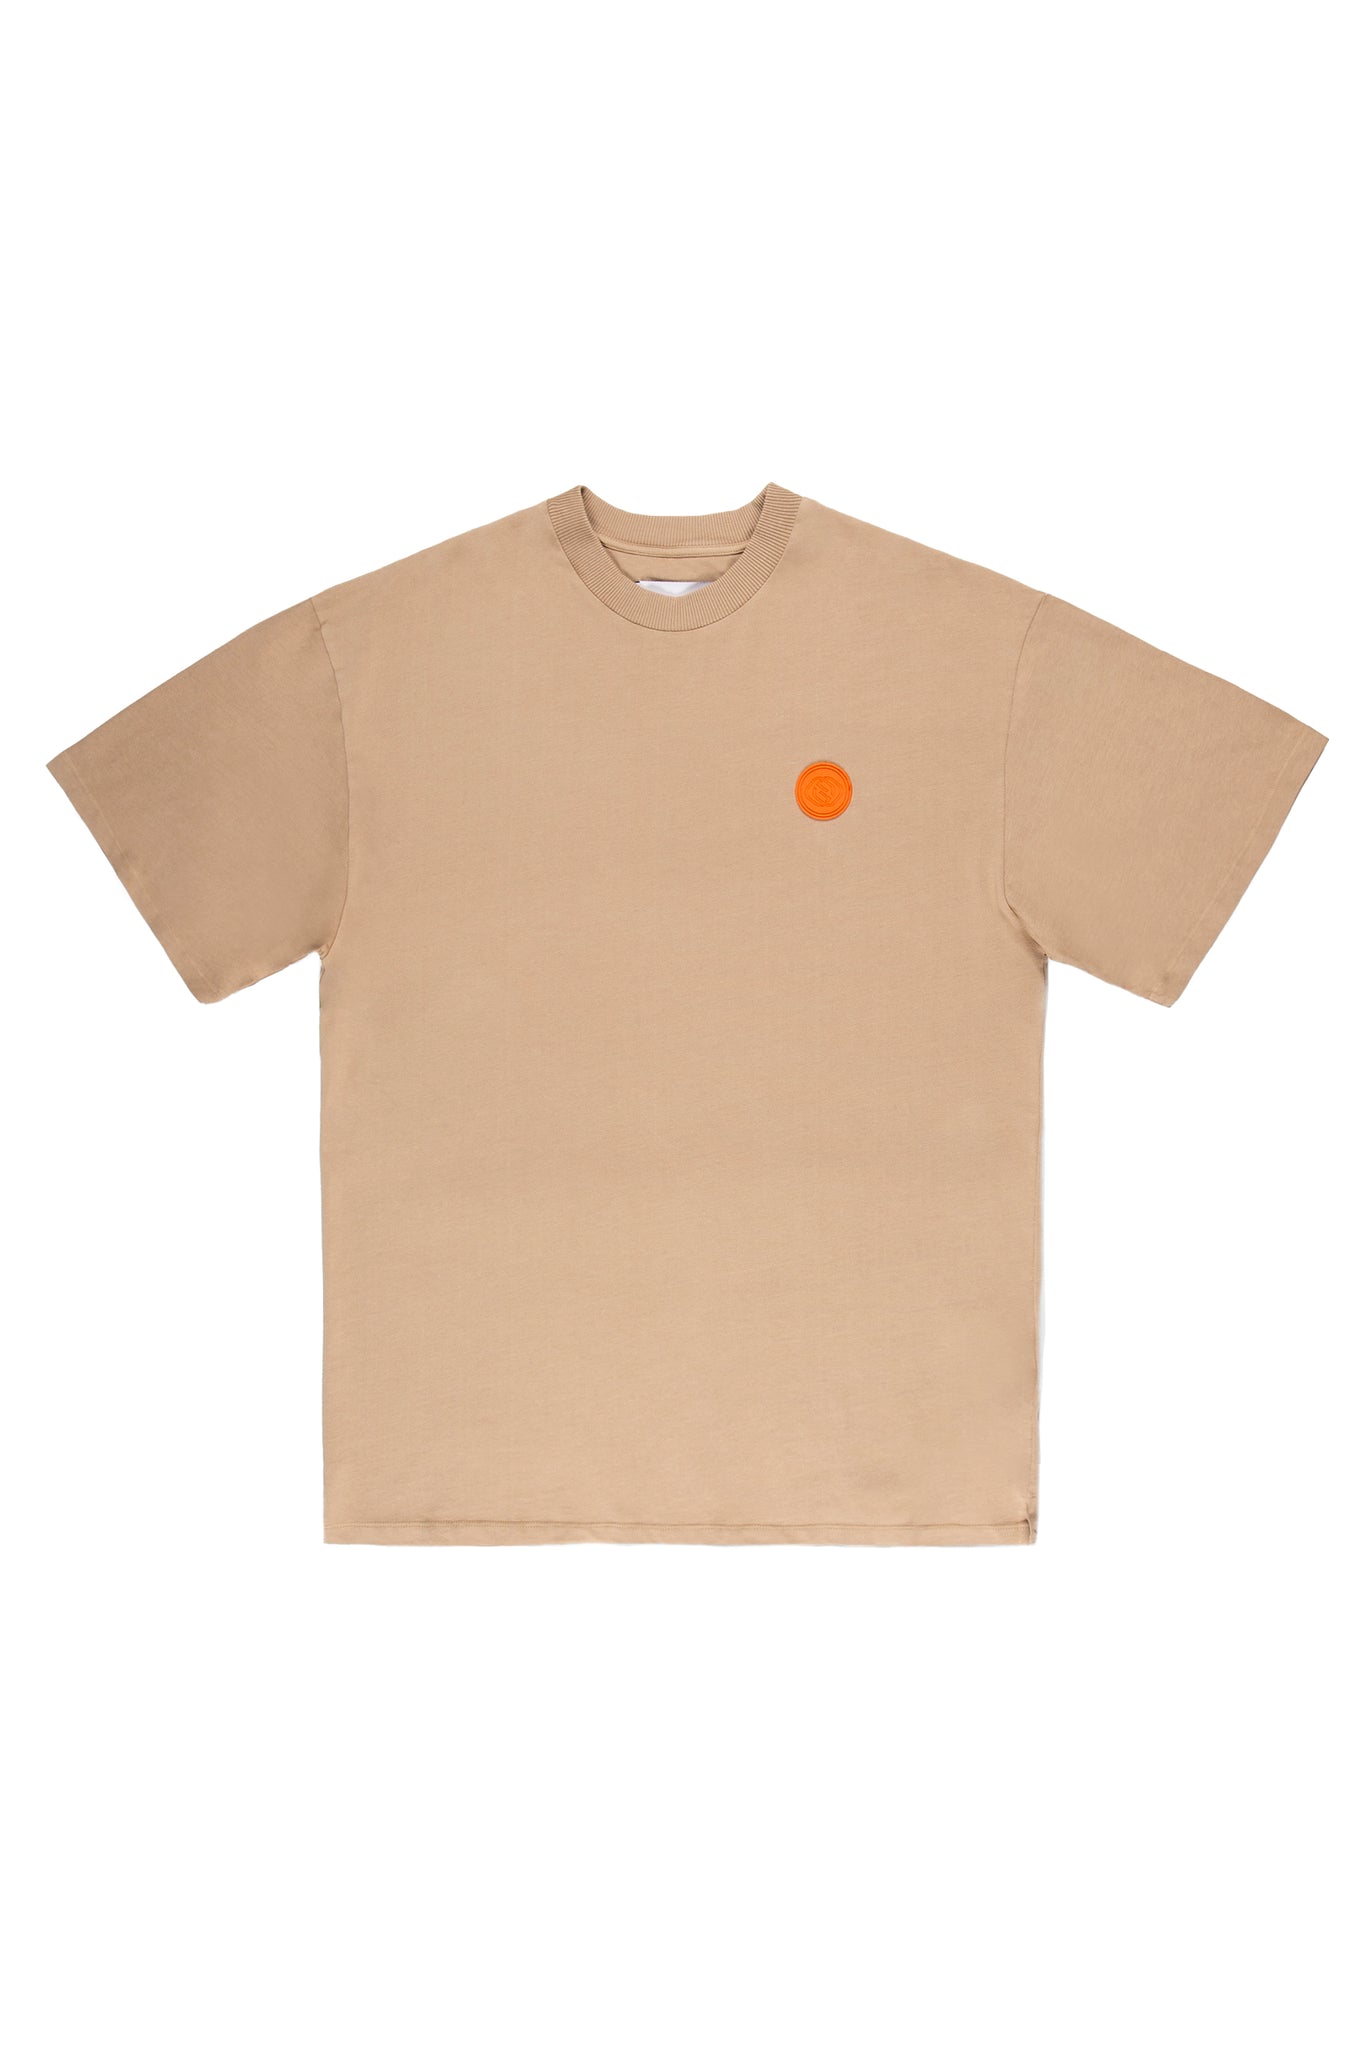 Grecco T-Shirt in Light Camel